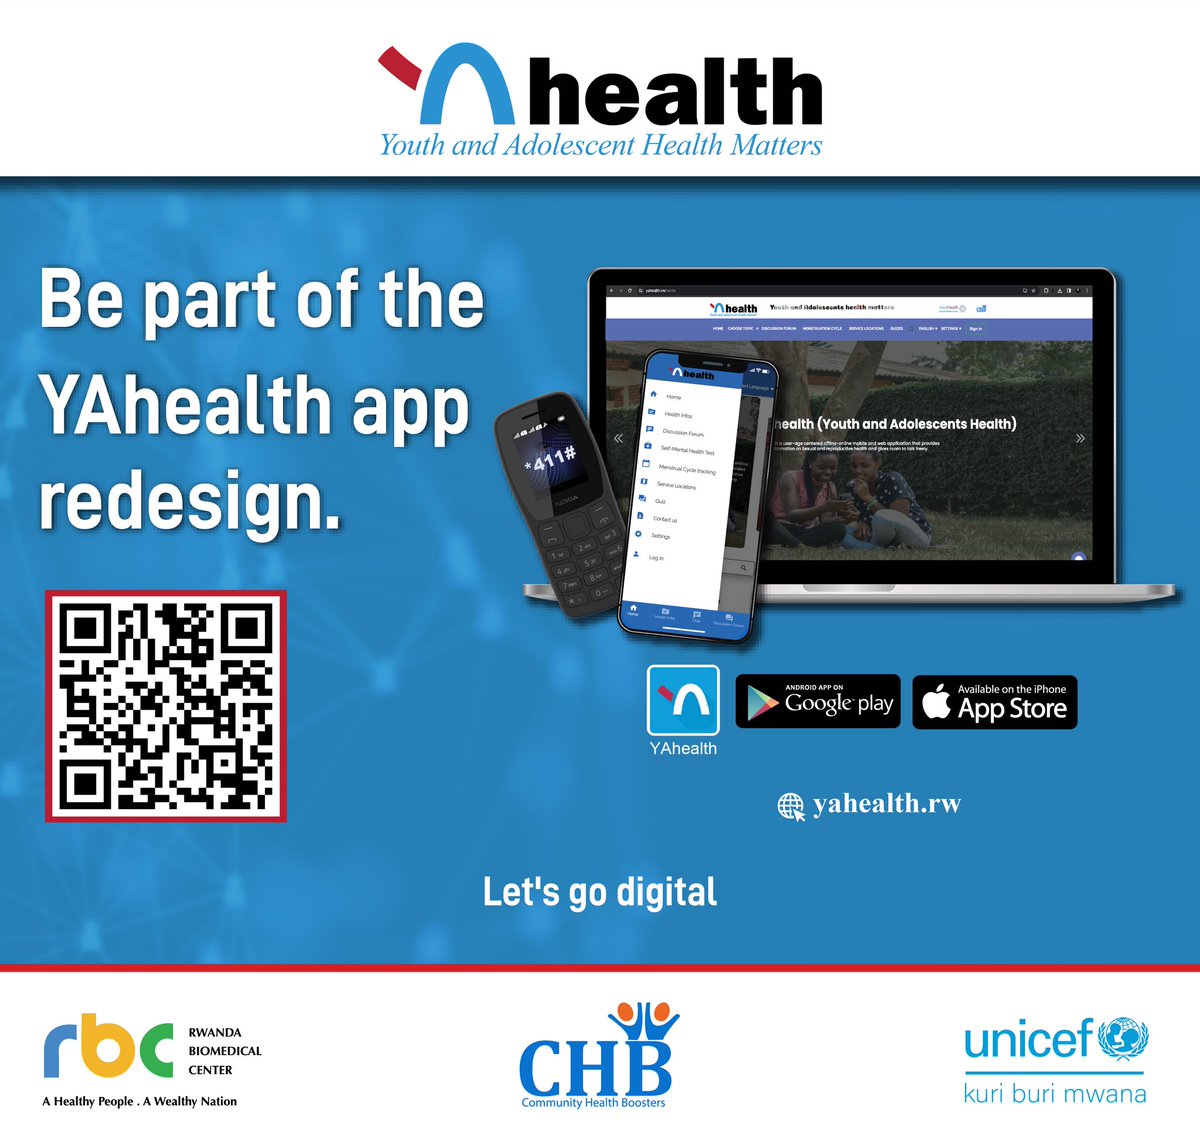 Join the YAhealth App Redesign! 🌟
🚀 
Are you passionate about youth mental health and SRHR?

We want YOUR voice in reshaping the #YAhealthApp! 

Let's co-create a platform that speaks directly to young minds. 
Share your ideas today! forms.office.com/r/aMJGvjgPsg

#LetsGoDigital